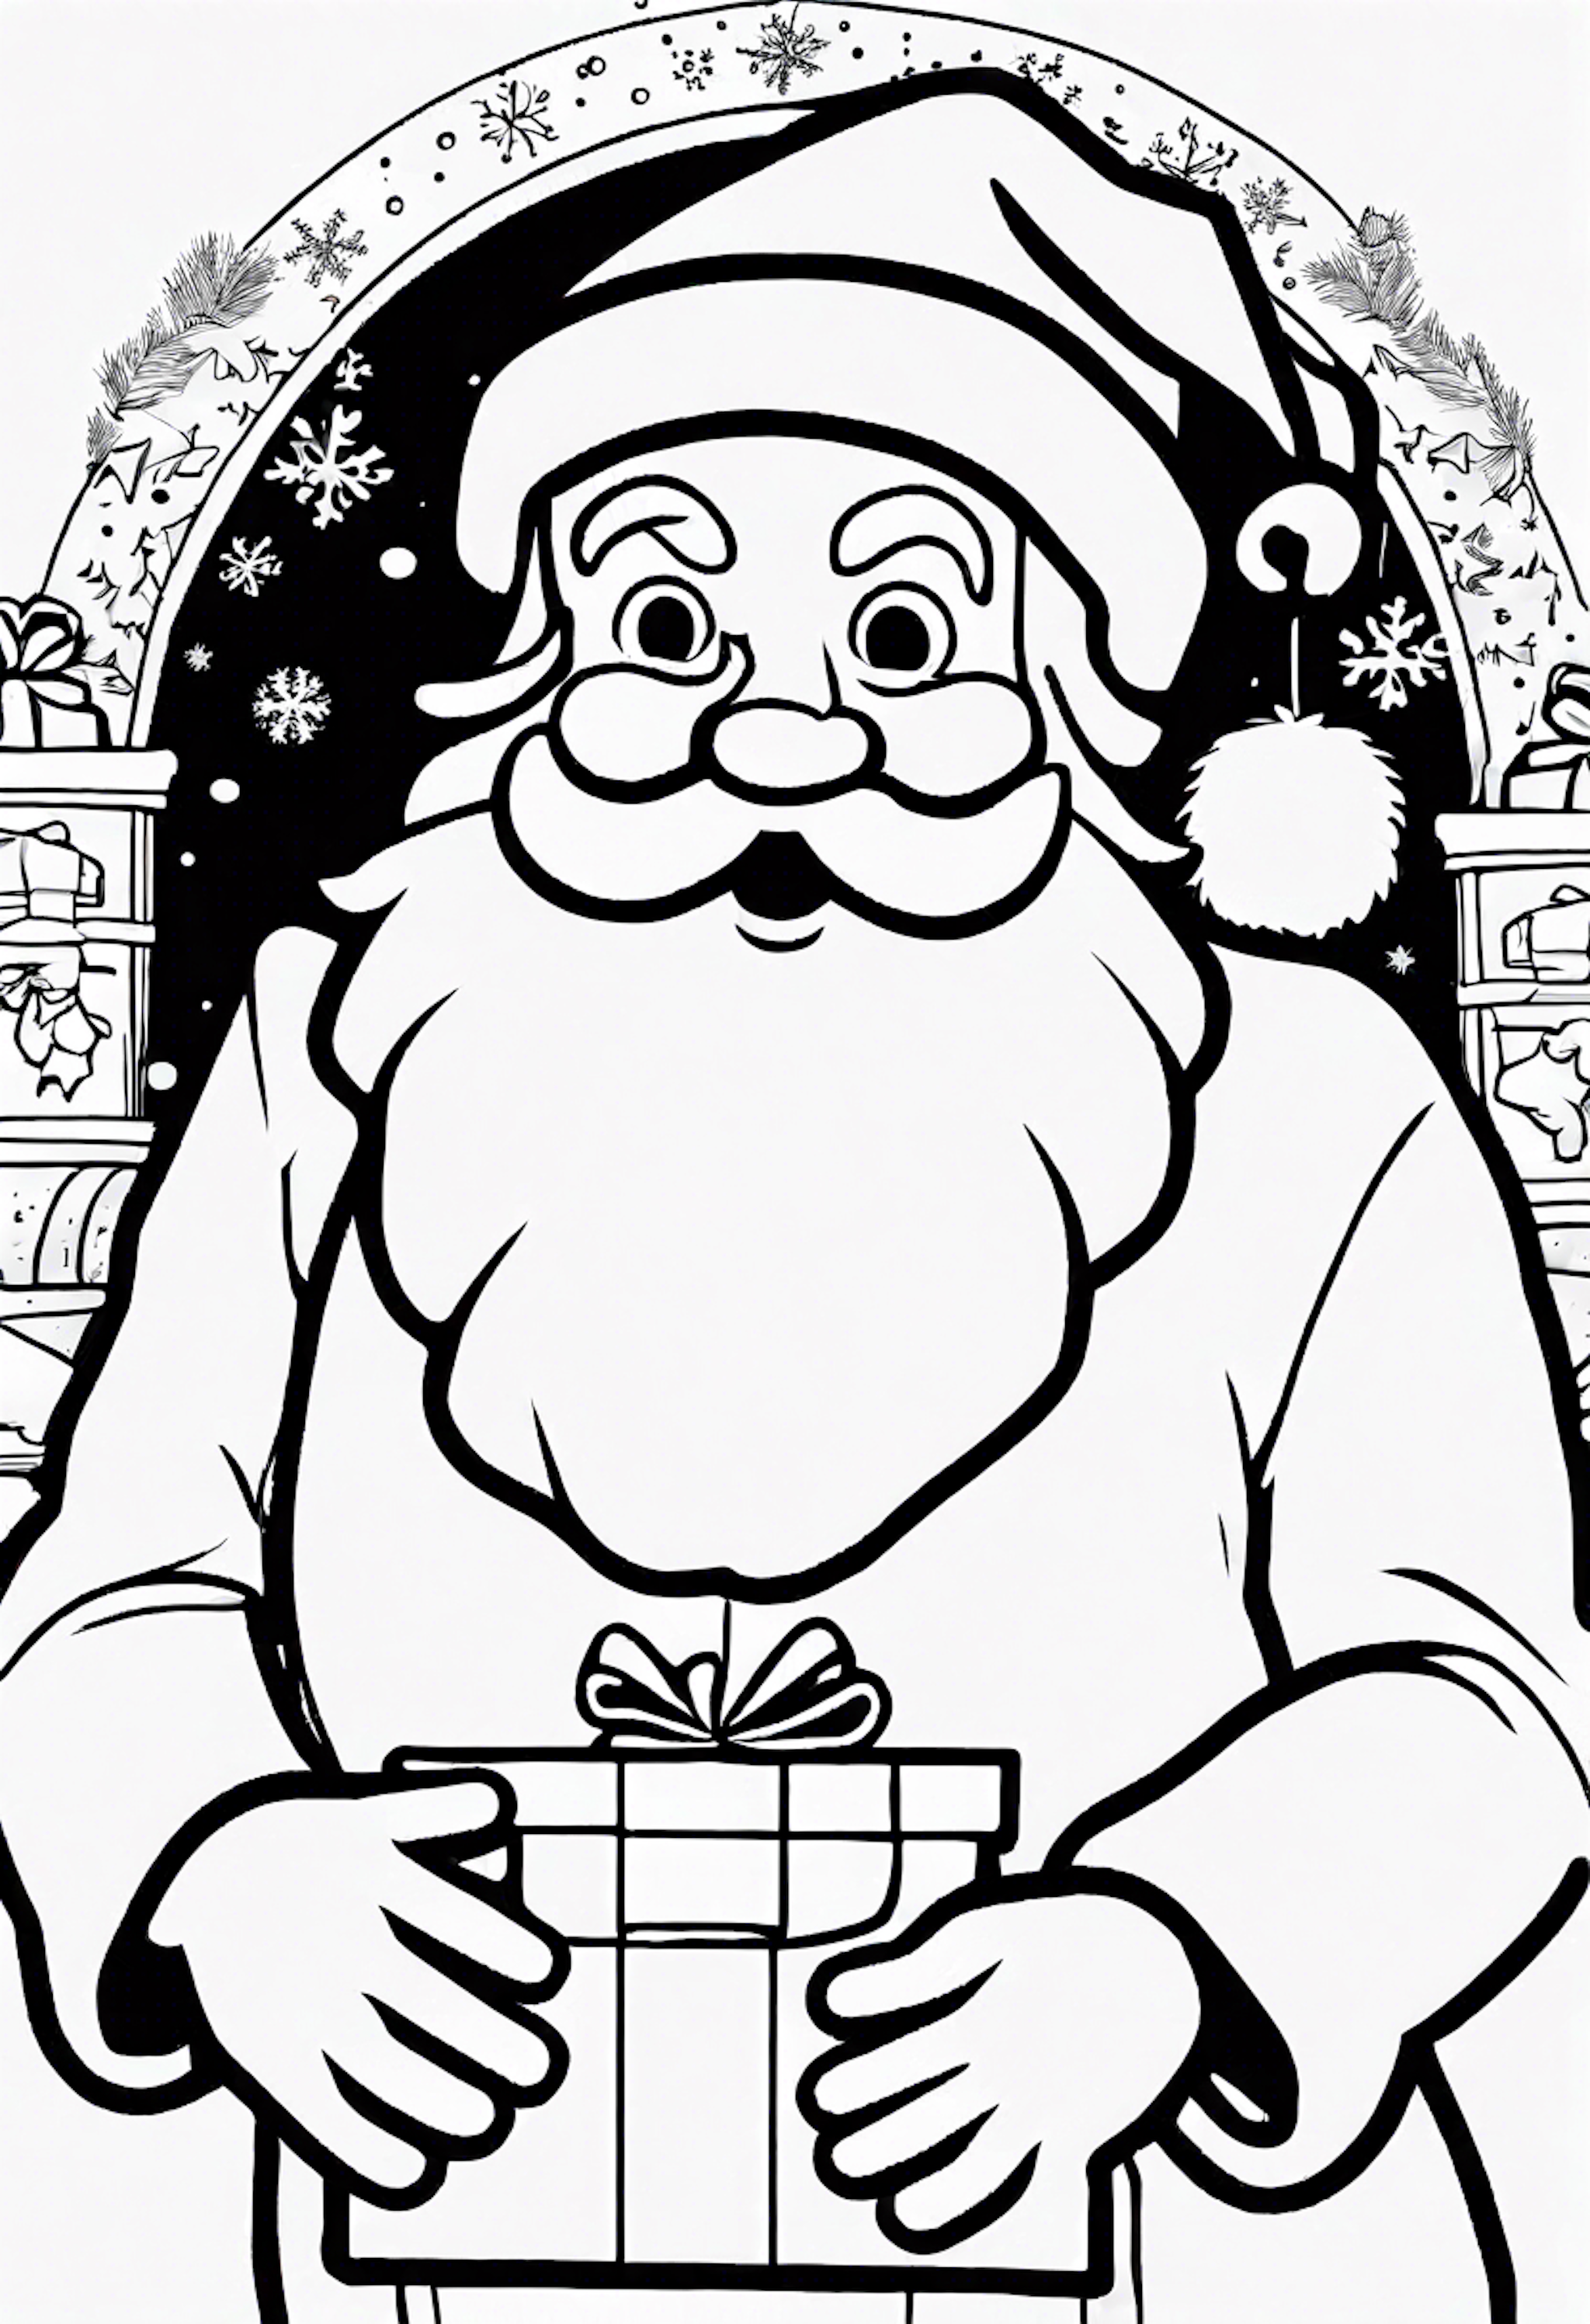 A coloring page for 11 Christmas coloring pages